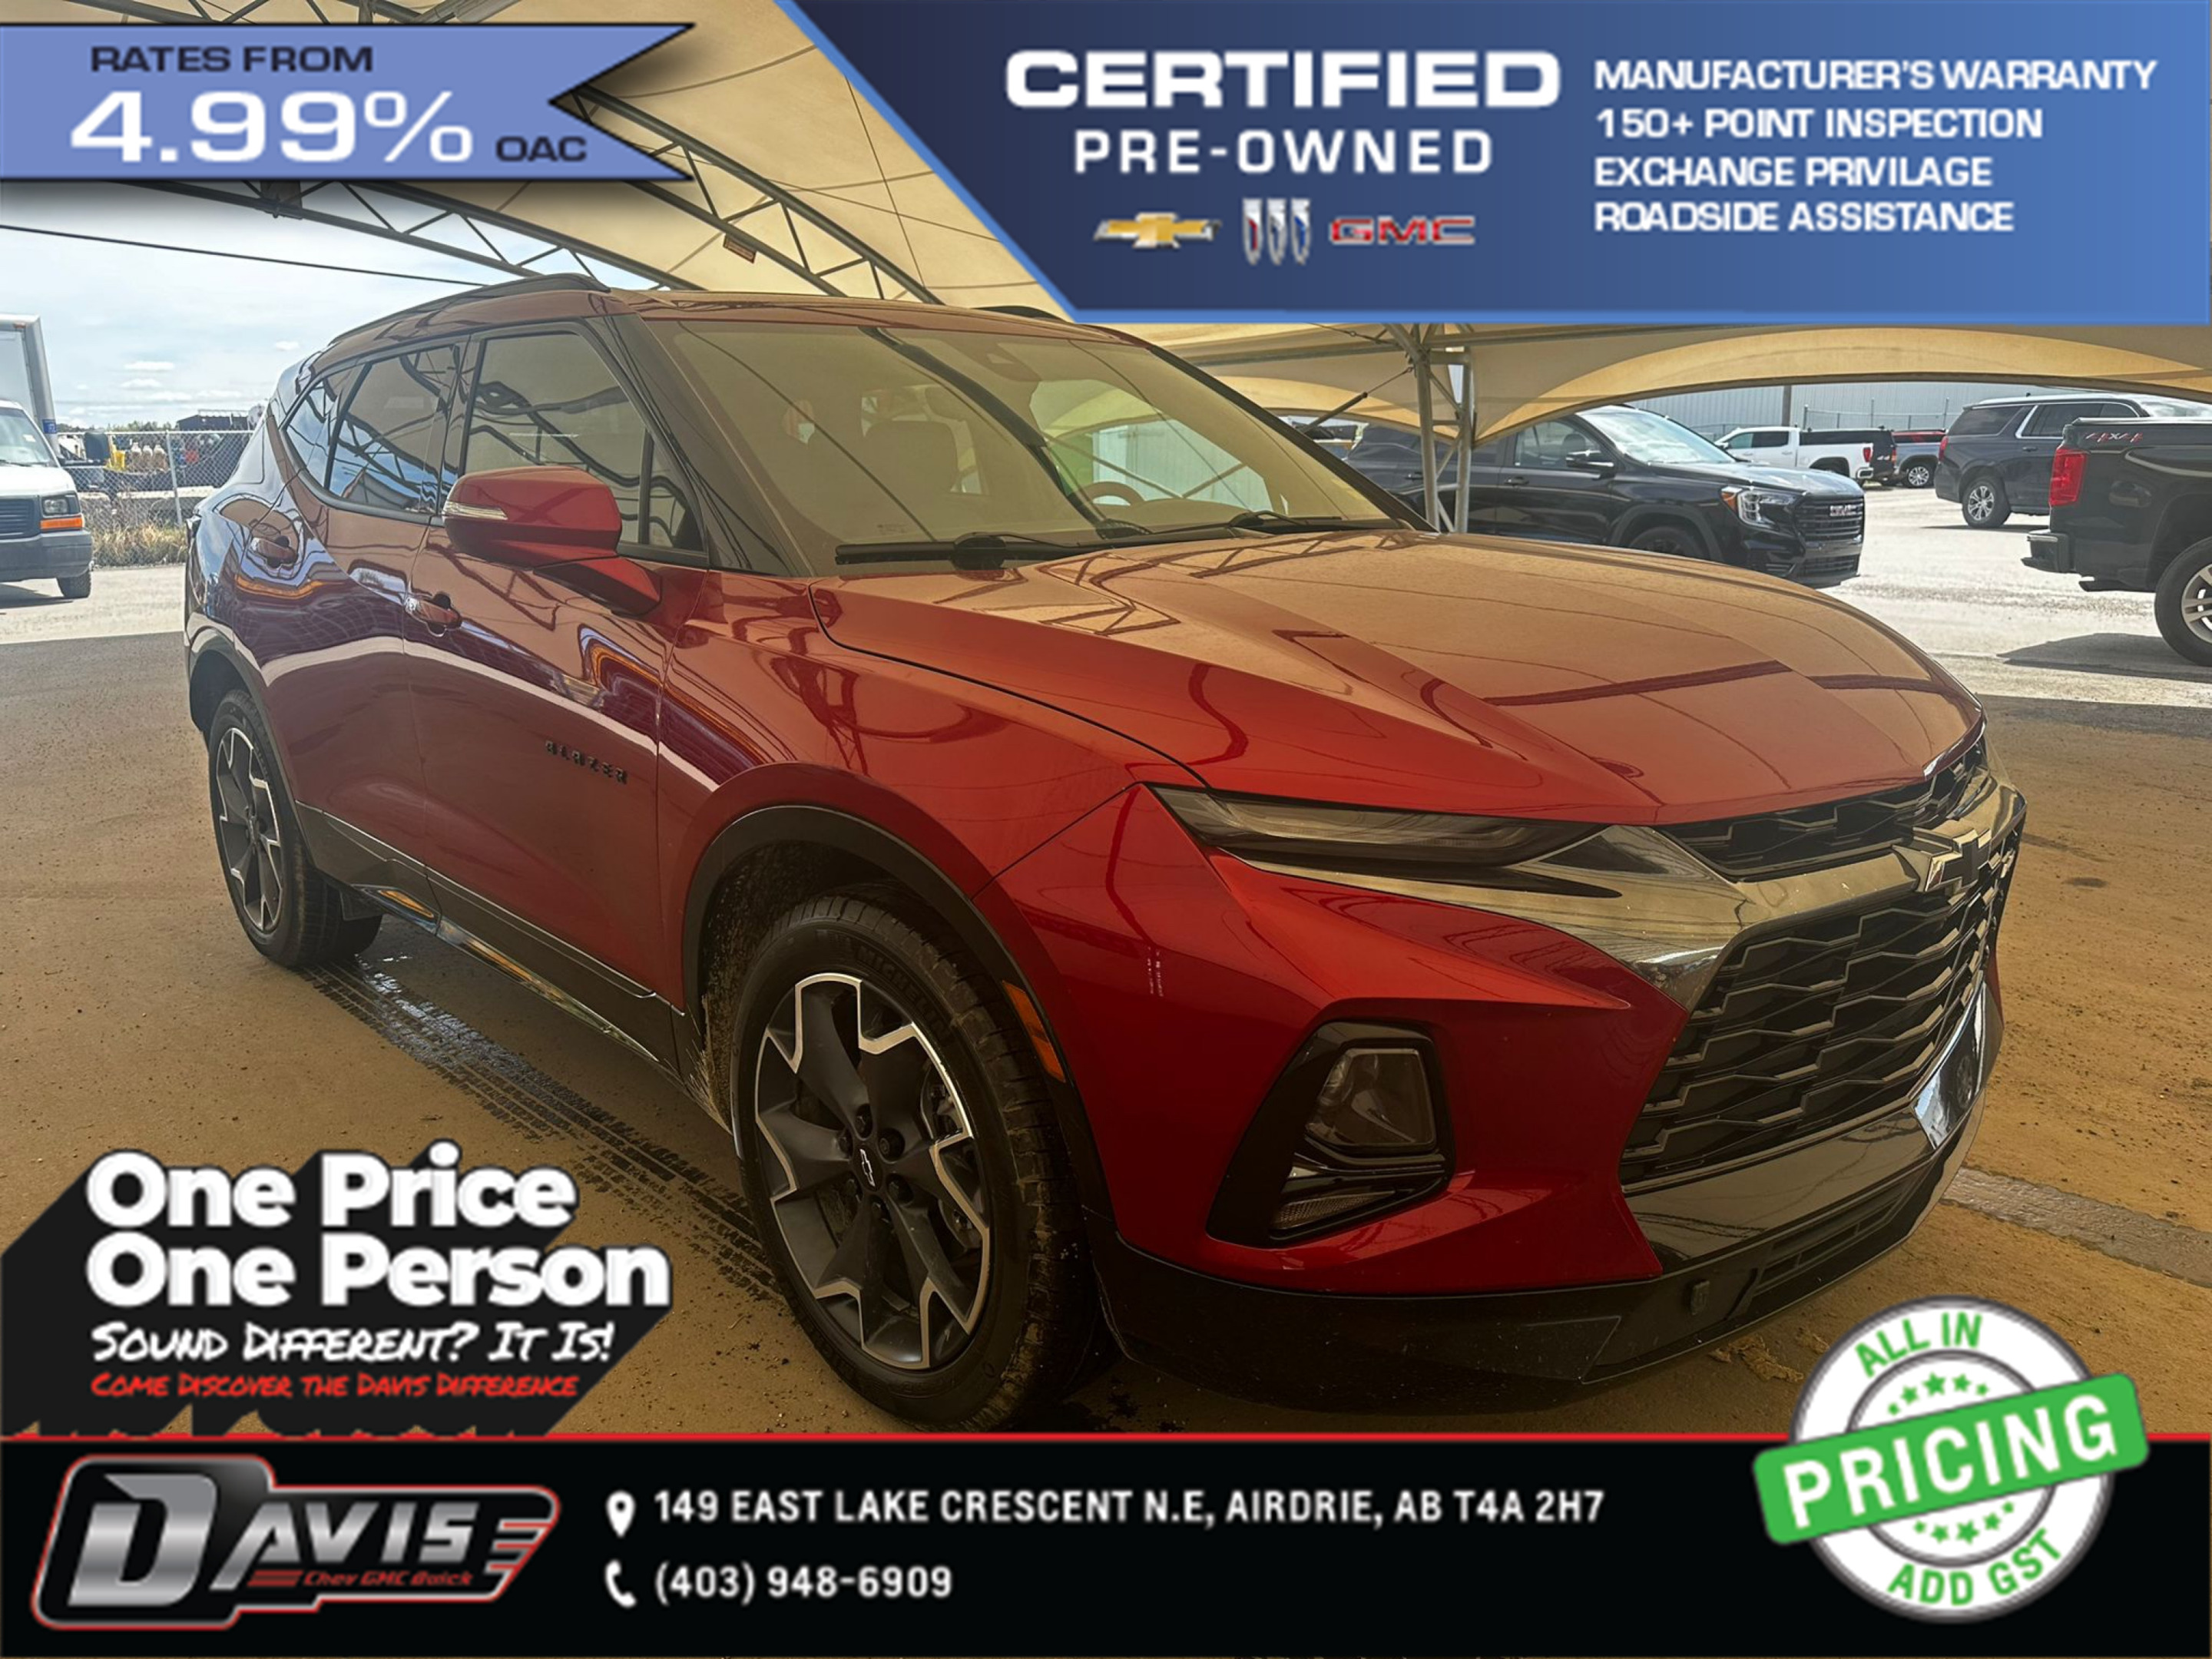 2021 Chevrolet Blazer RS 300+ HP V6 | SUNROOF | HEATED & COOLED LEATHER 